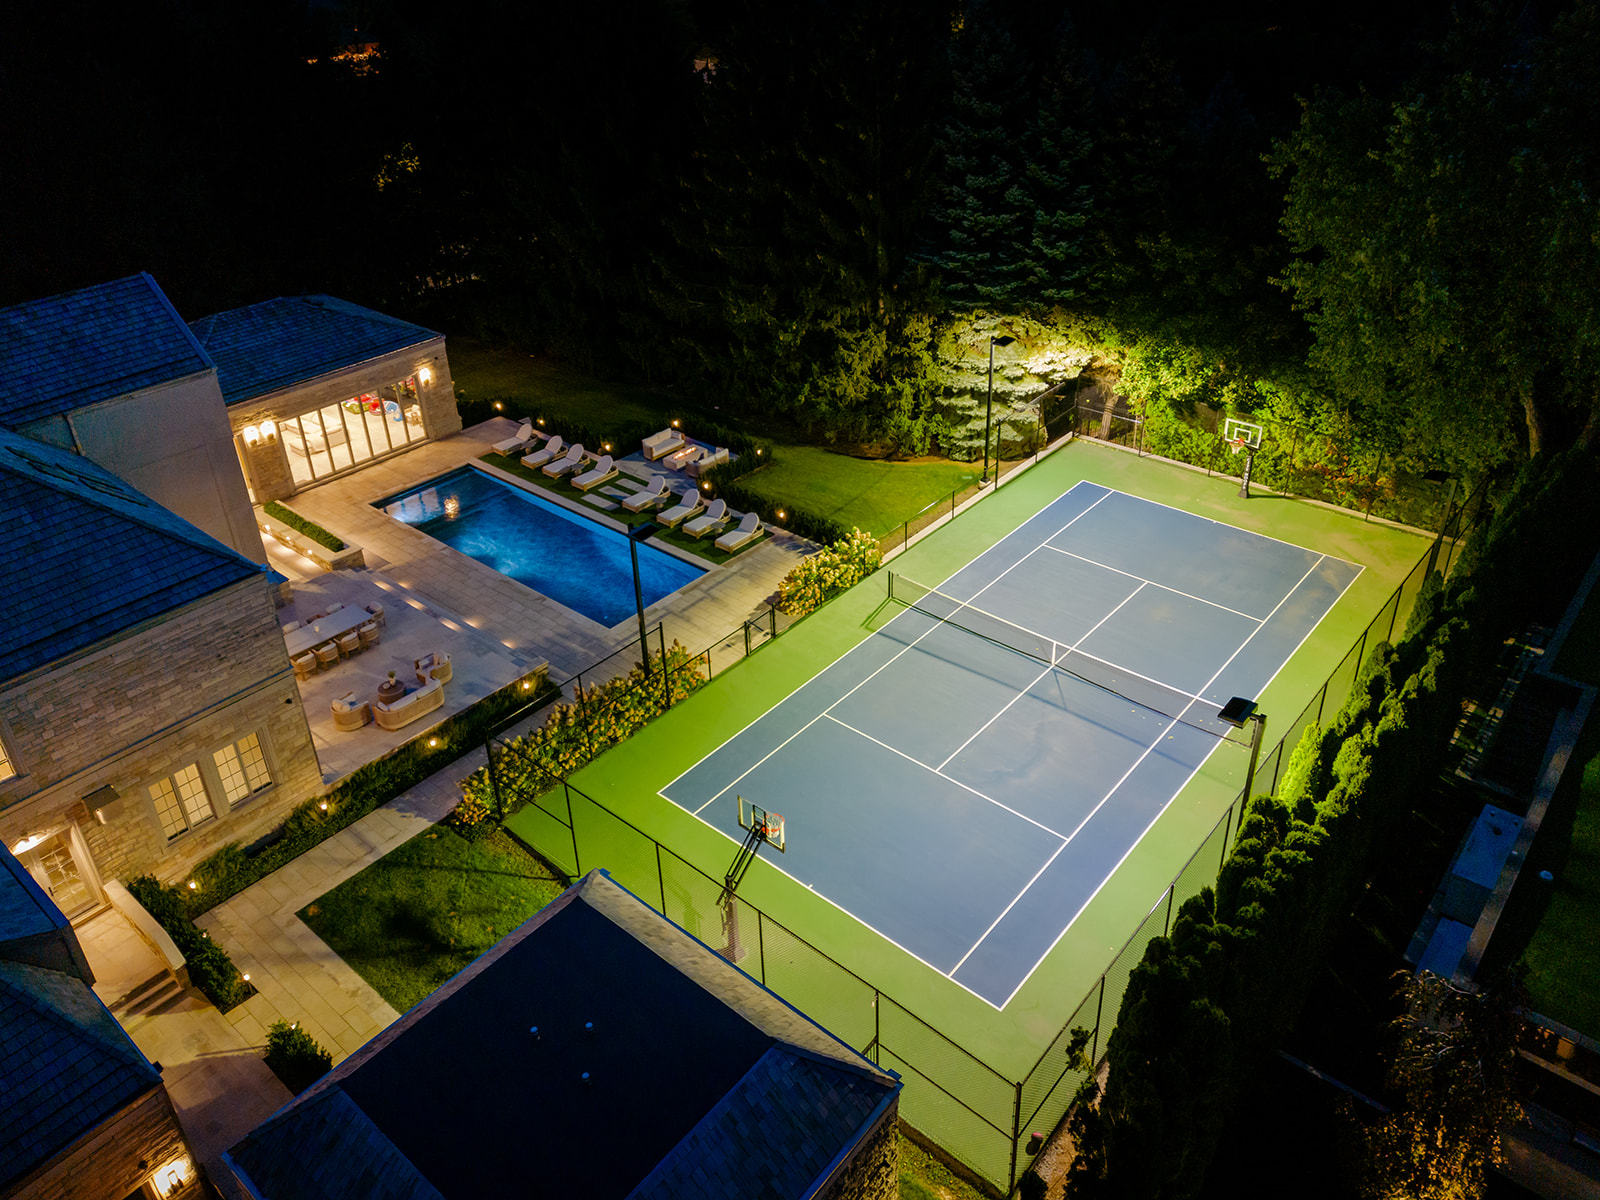 A done shot of the tennis court lit up at night.